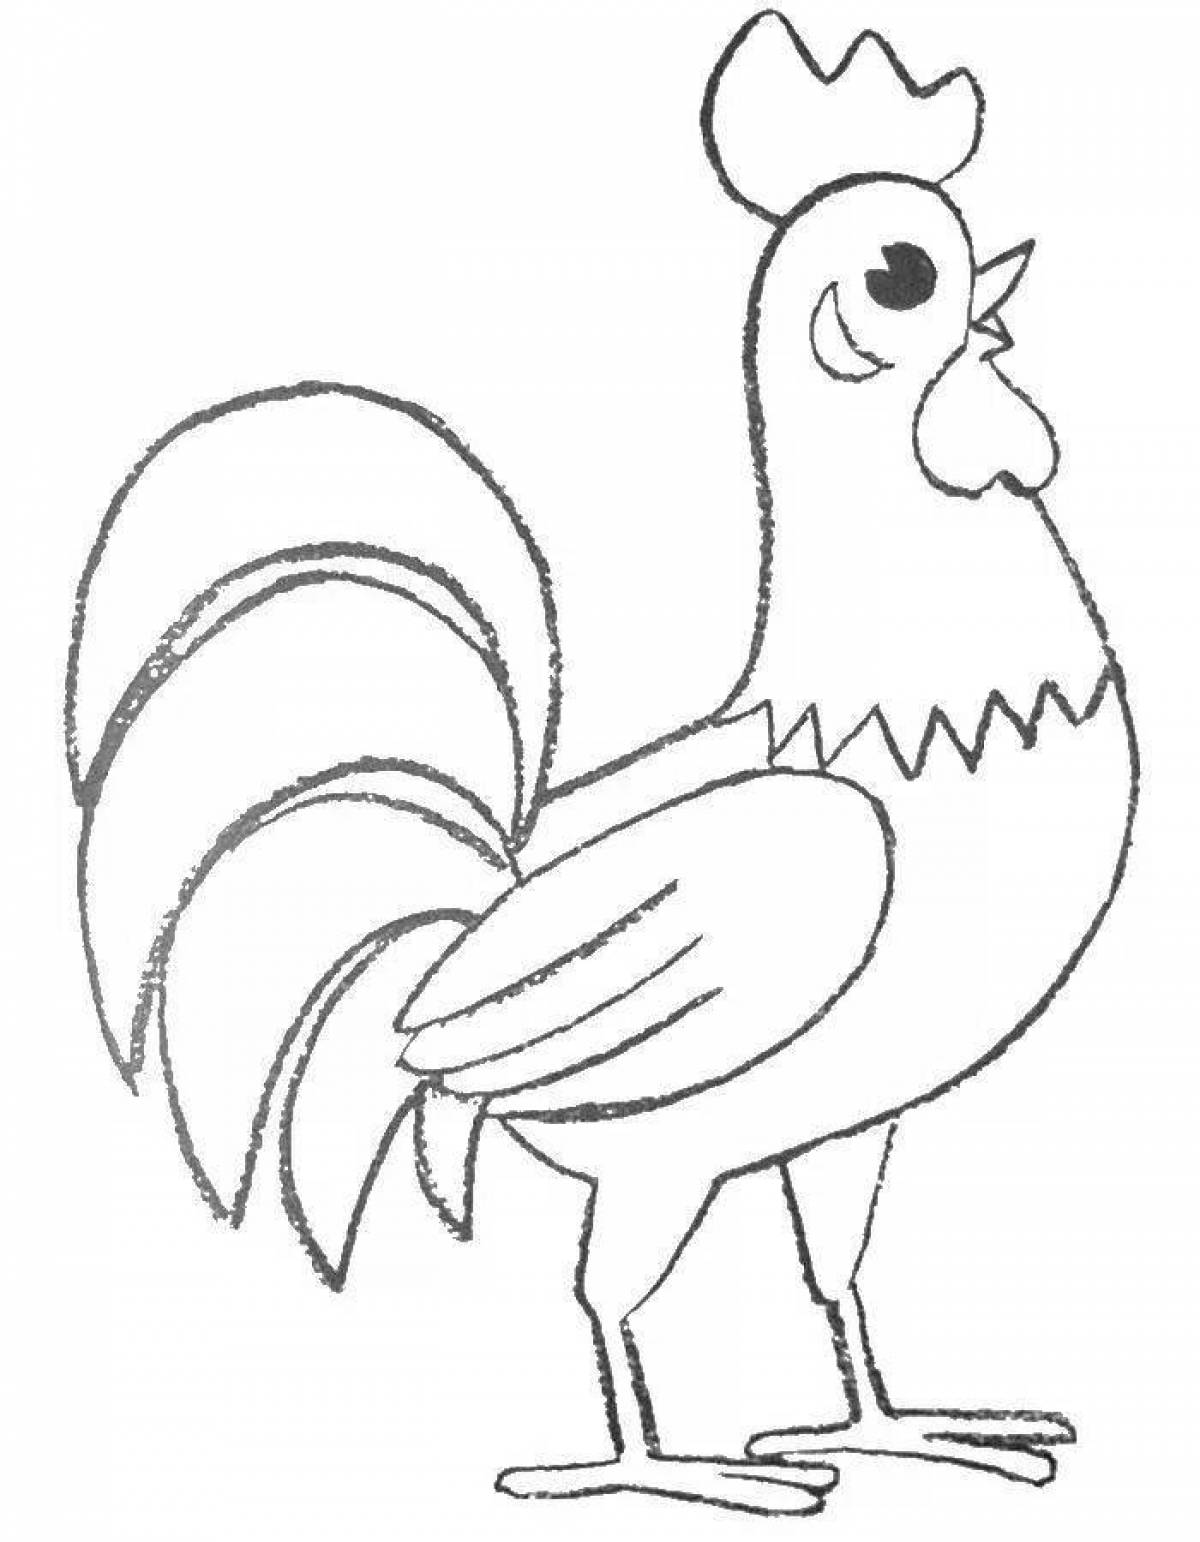 Fabulous rooster coloring for kids